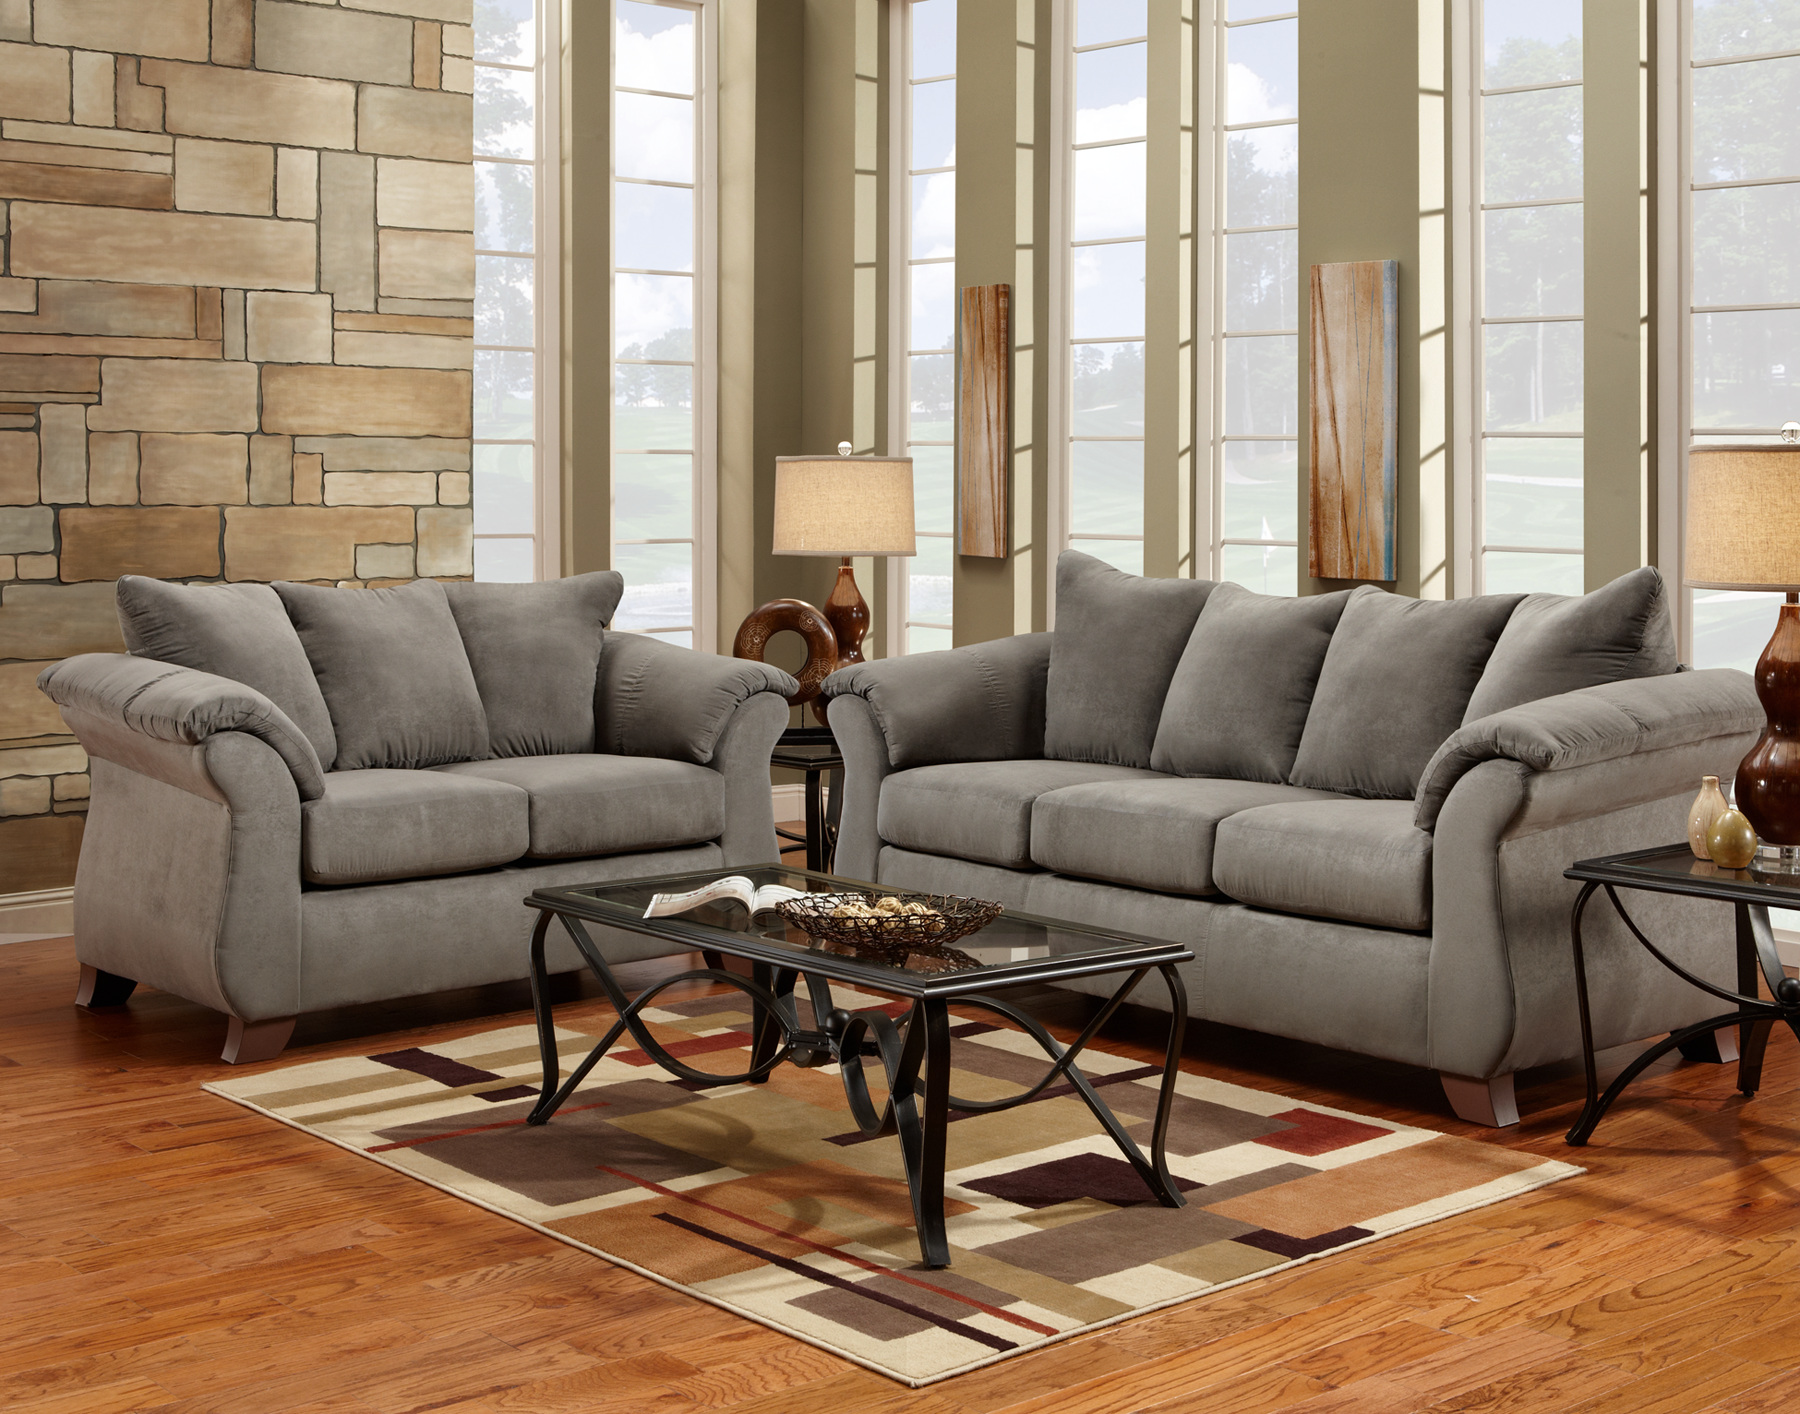 Living Room With Grey Pleather Couch